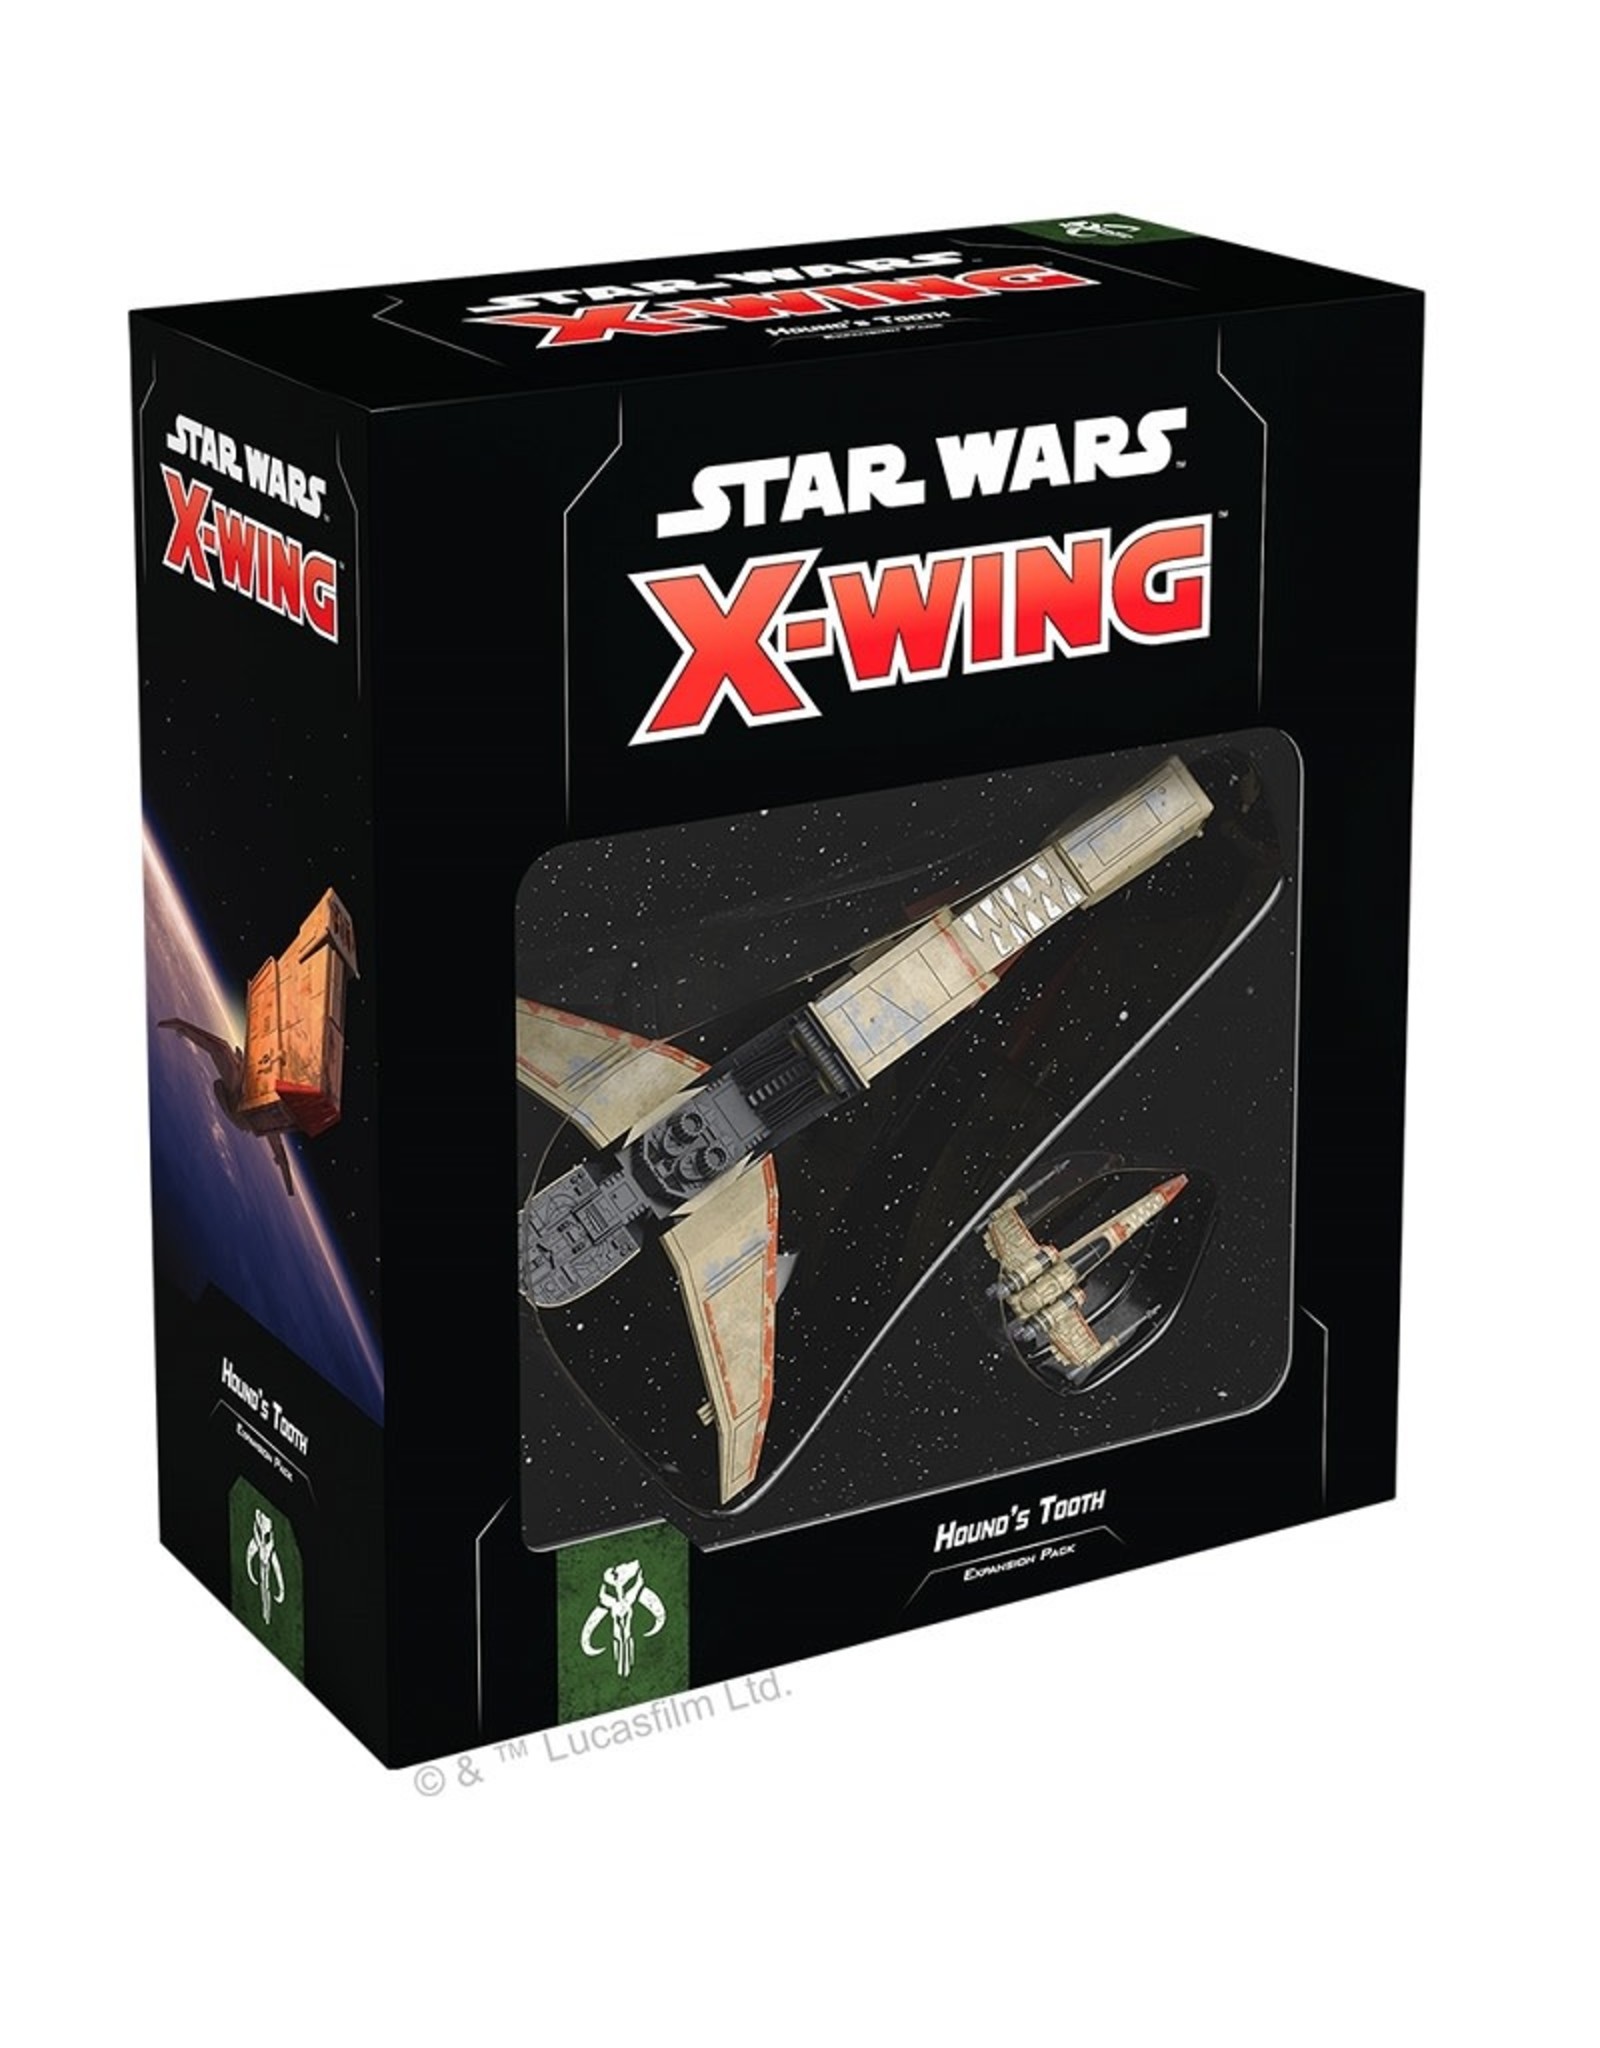 Atomic Mass Games (S/O) Star Wars X-Wing: Hound's Tooth - 2nd Edition